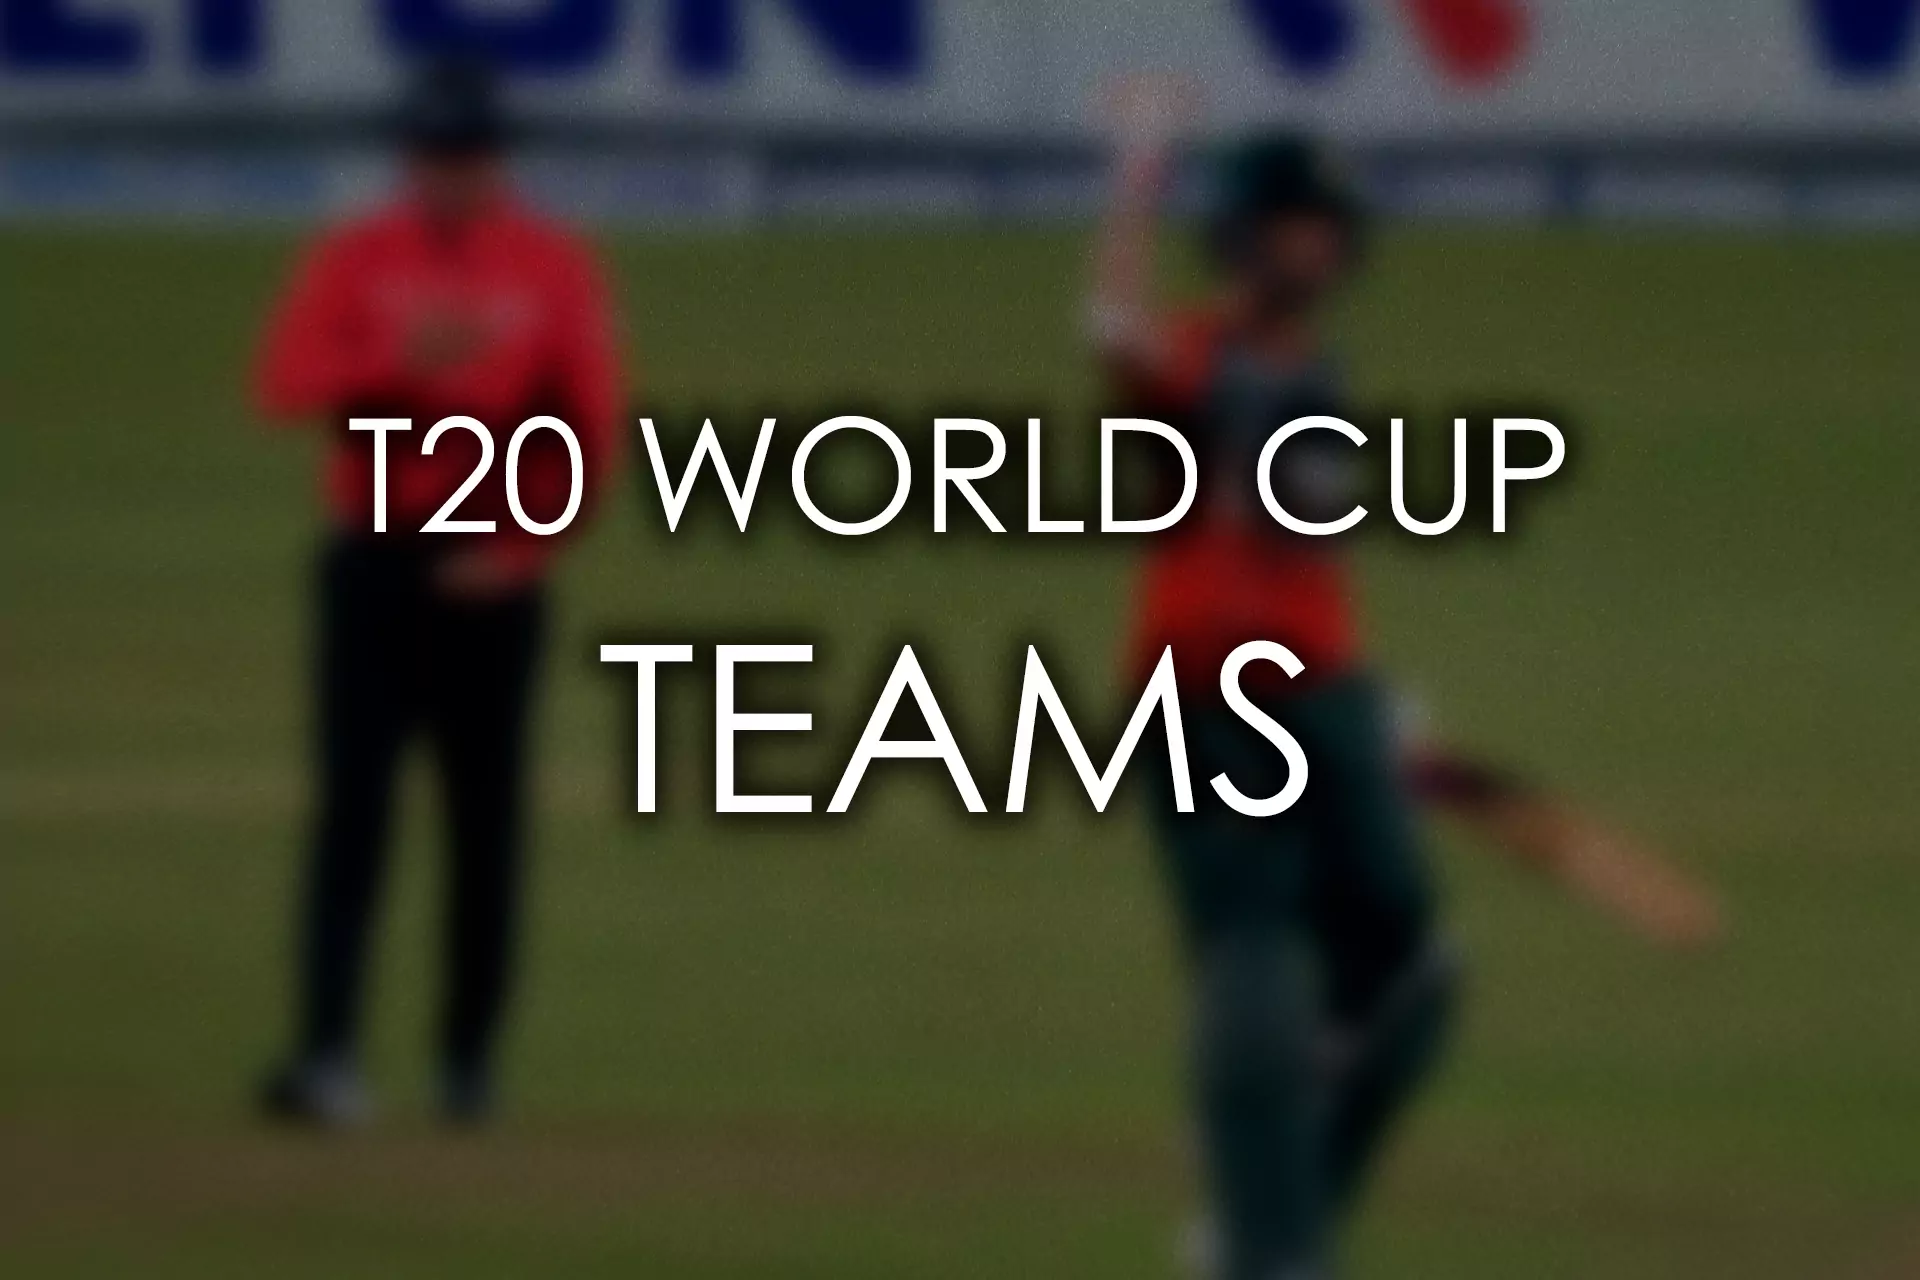 In the T20 Cricket World Cup, there are 16 teams from all over the world take part.